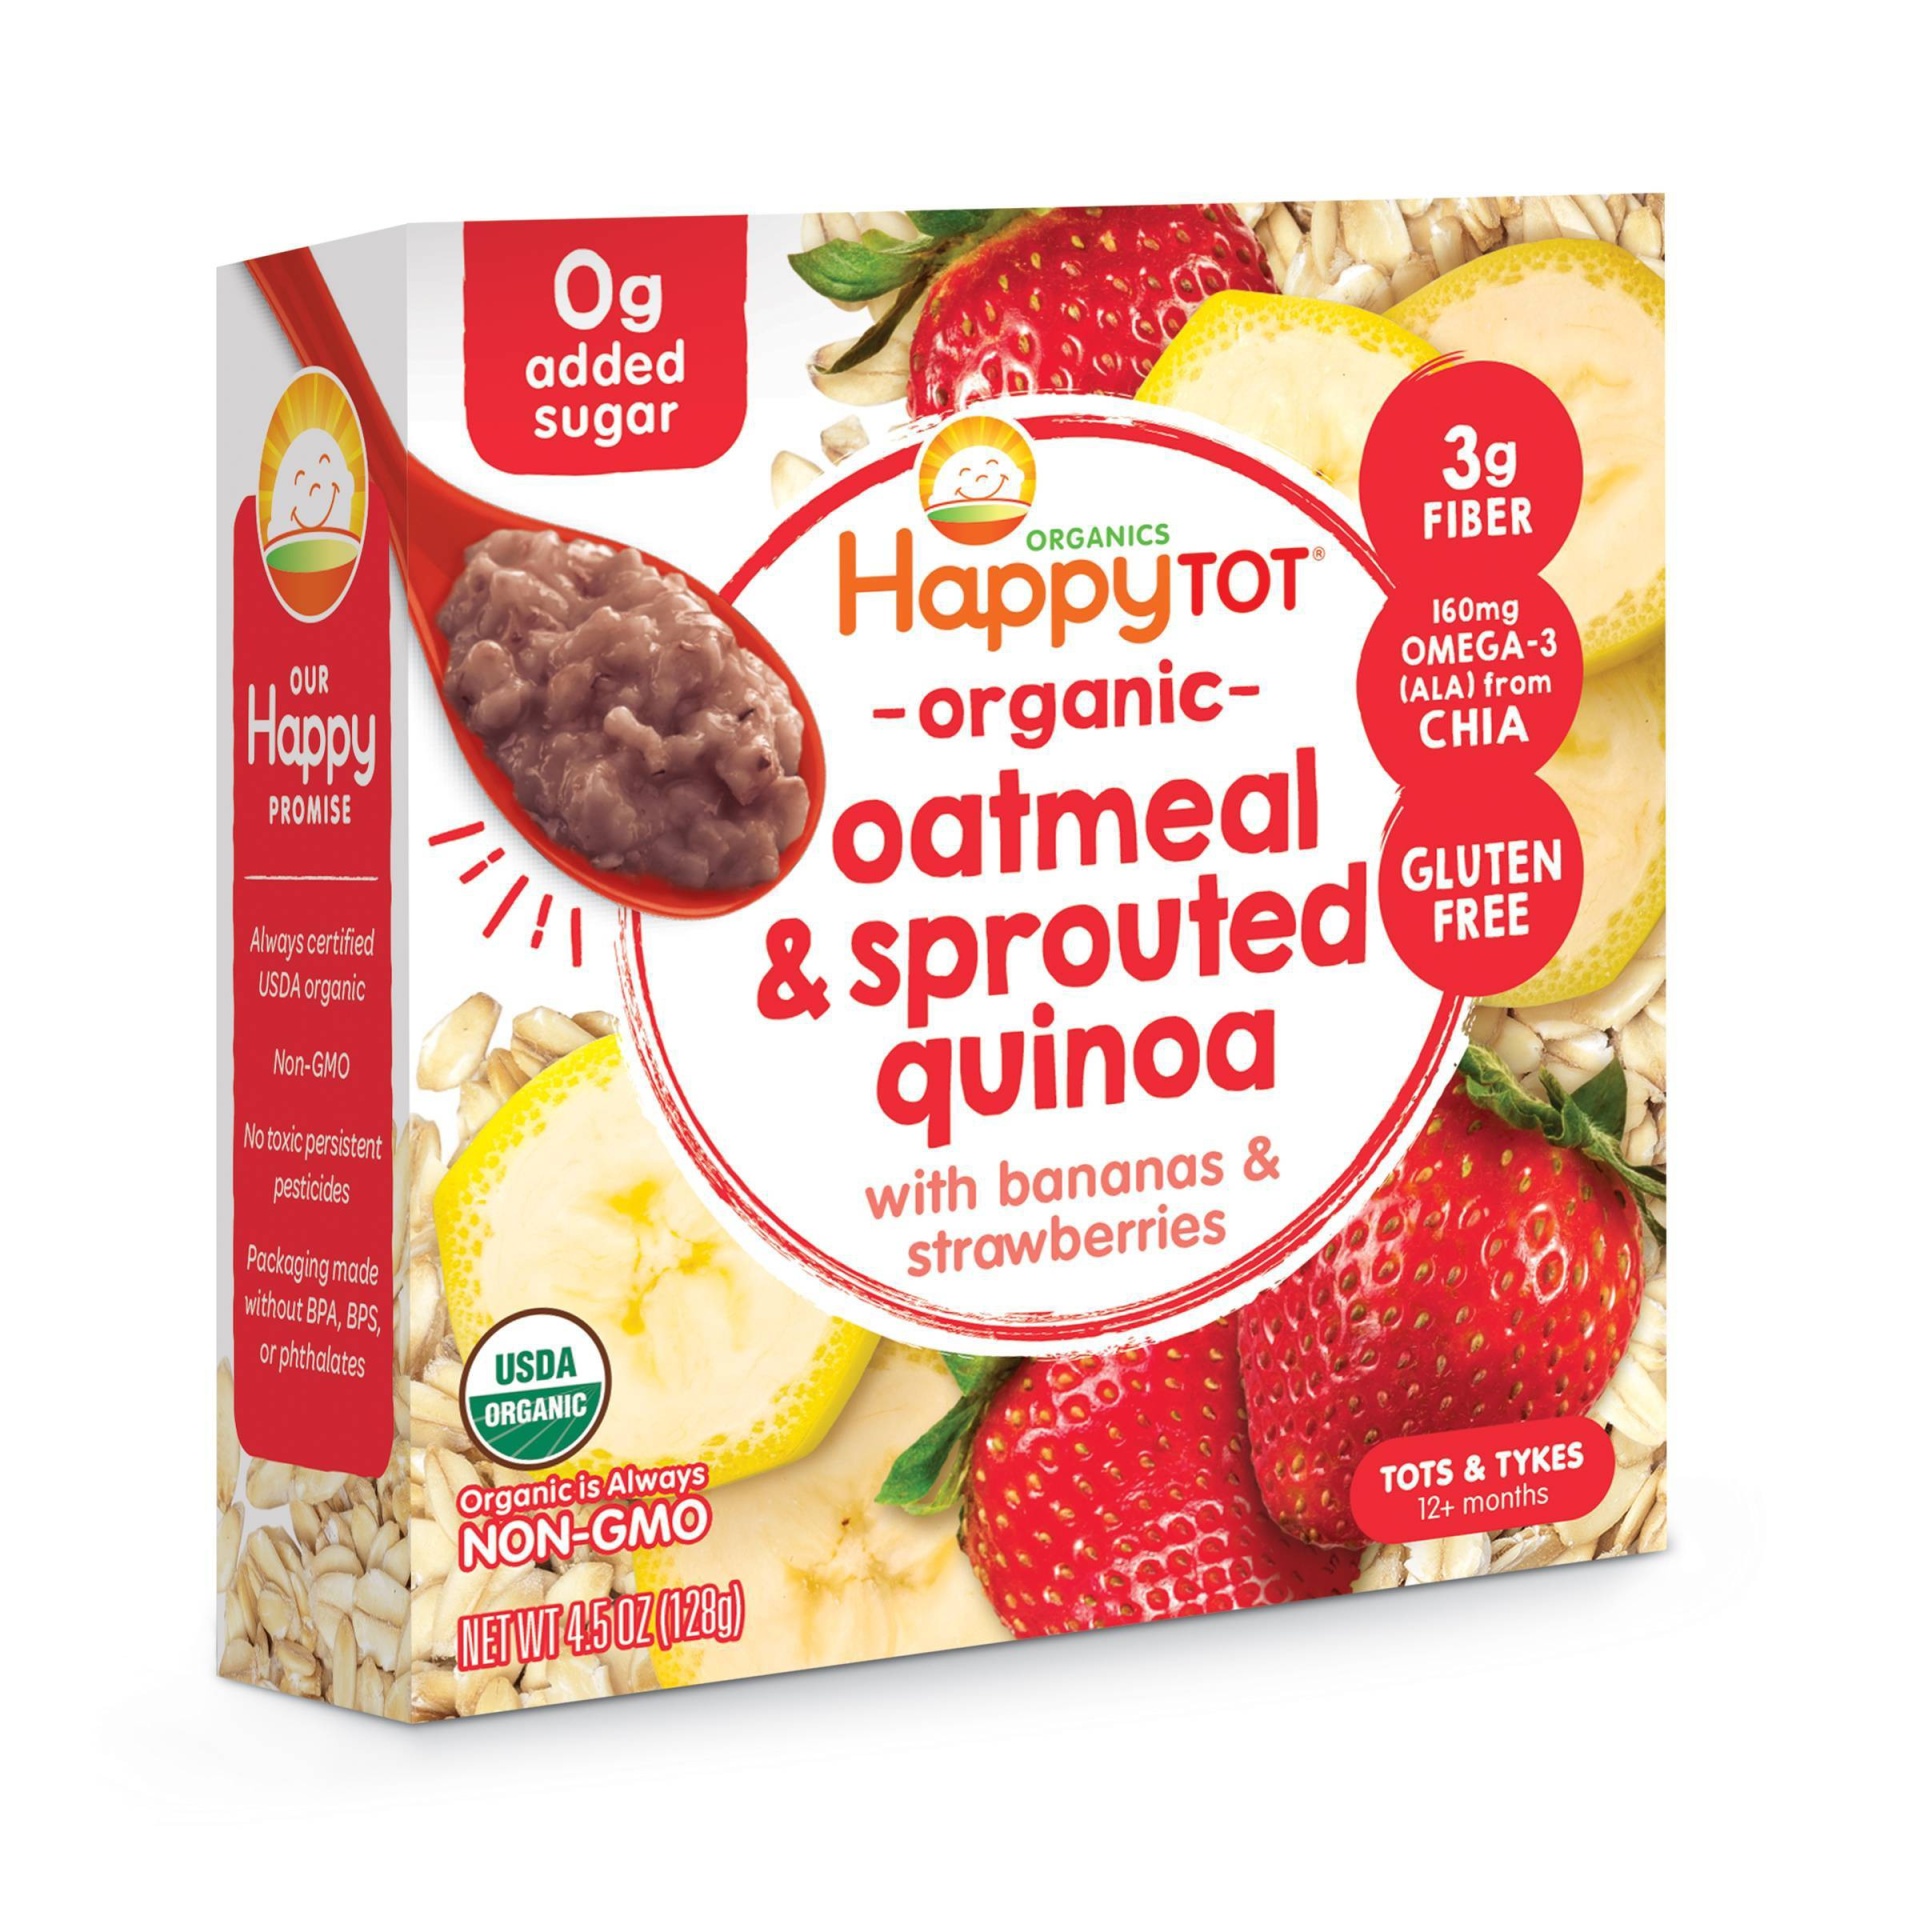 slide 1 of 3, Happy Family HappyTot Organic Oatmeal & Sprouted Quinoa with Bananas & Strawberries Baby Food, 4.5 oz